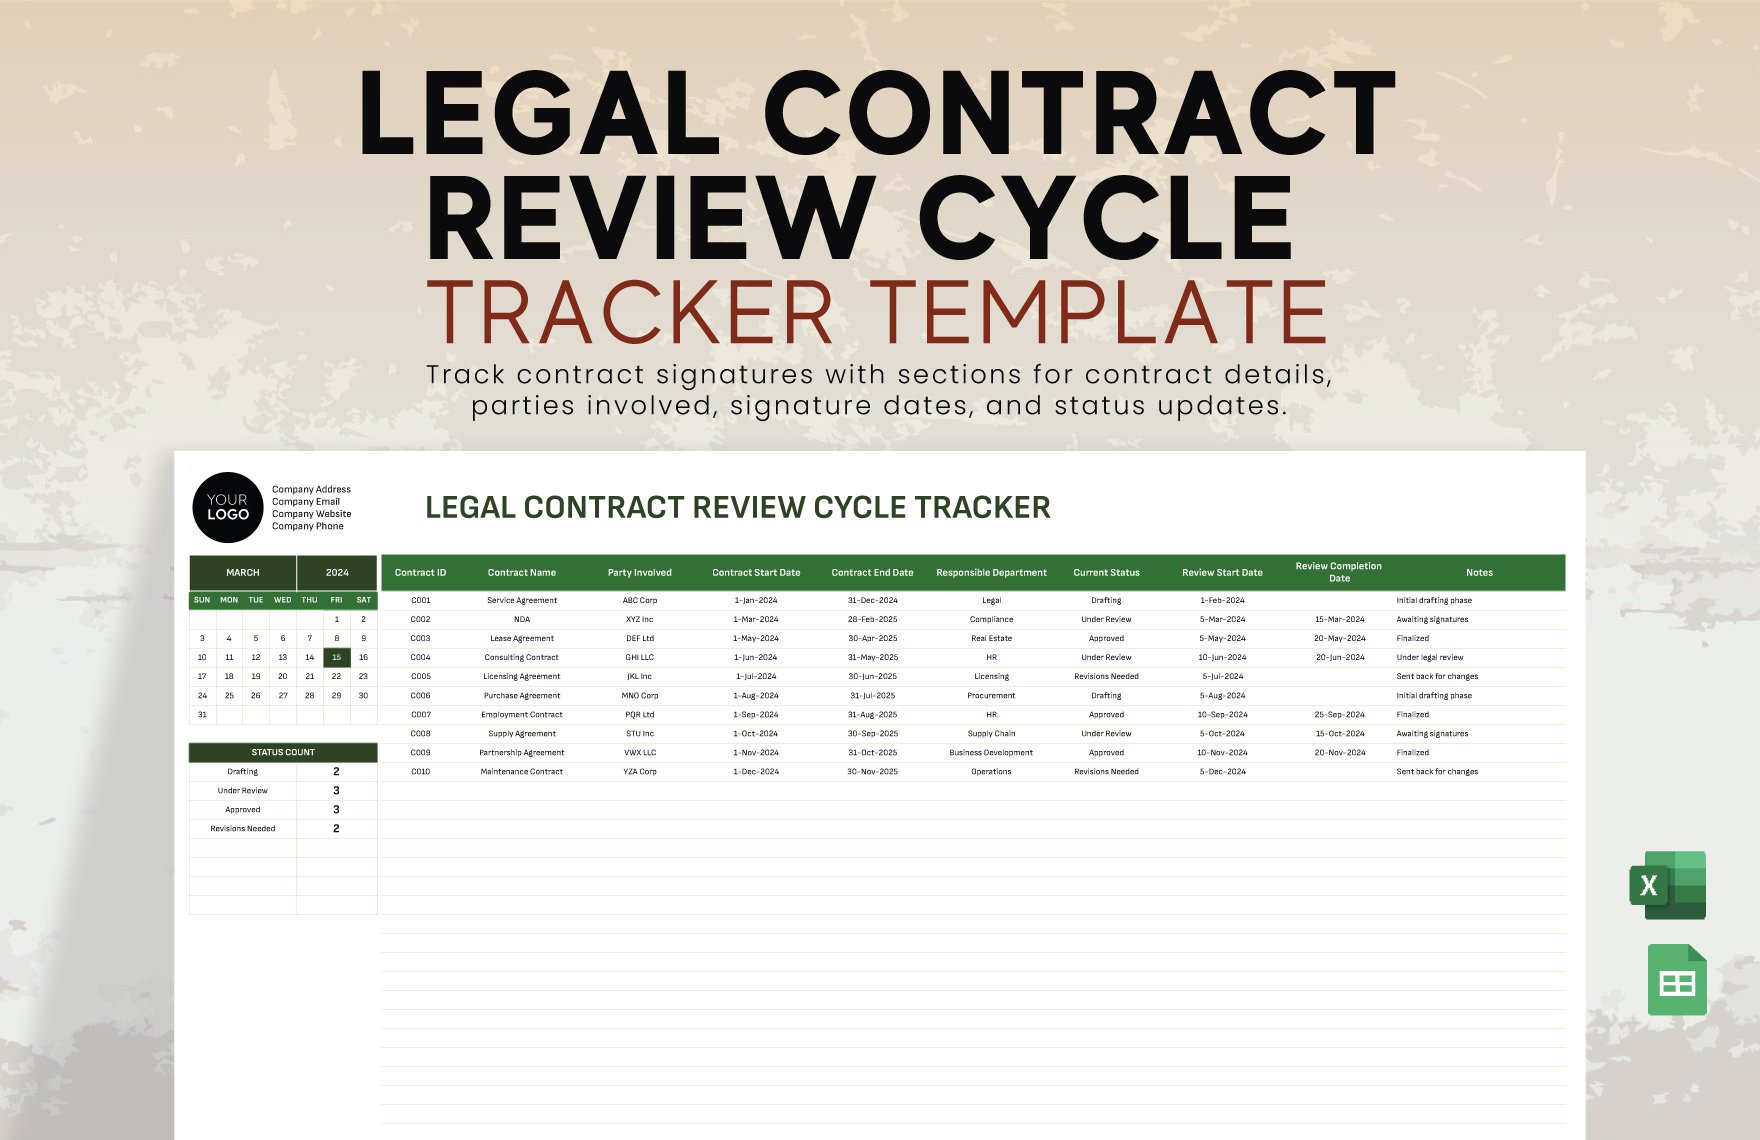 Legal Contract Review Cycle Tracker Template in Excel, Google Sheets